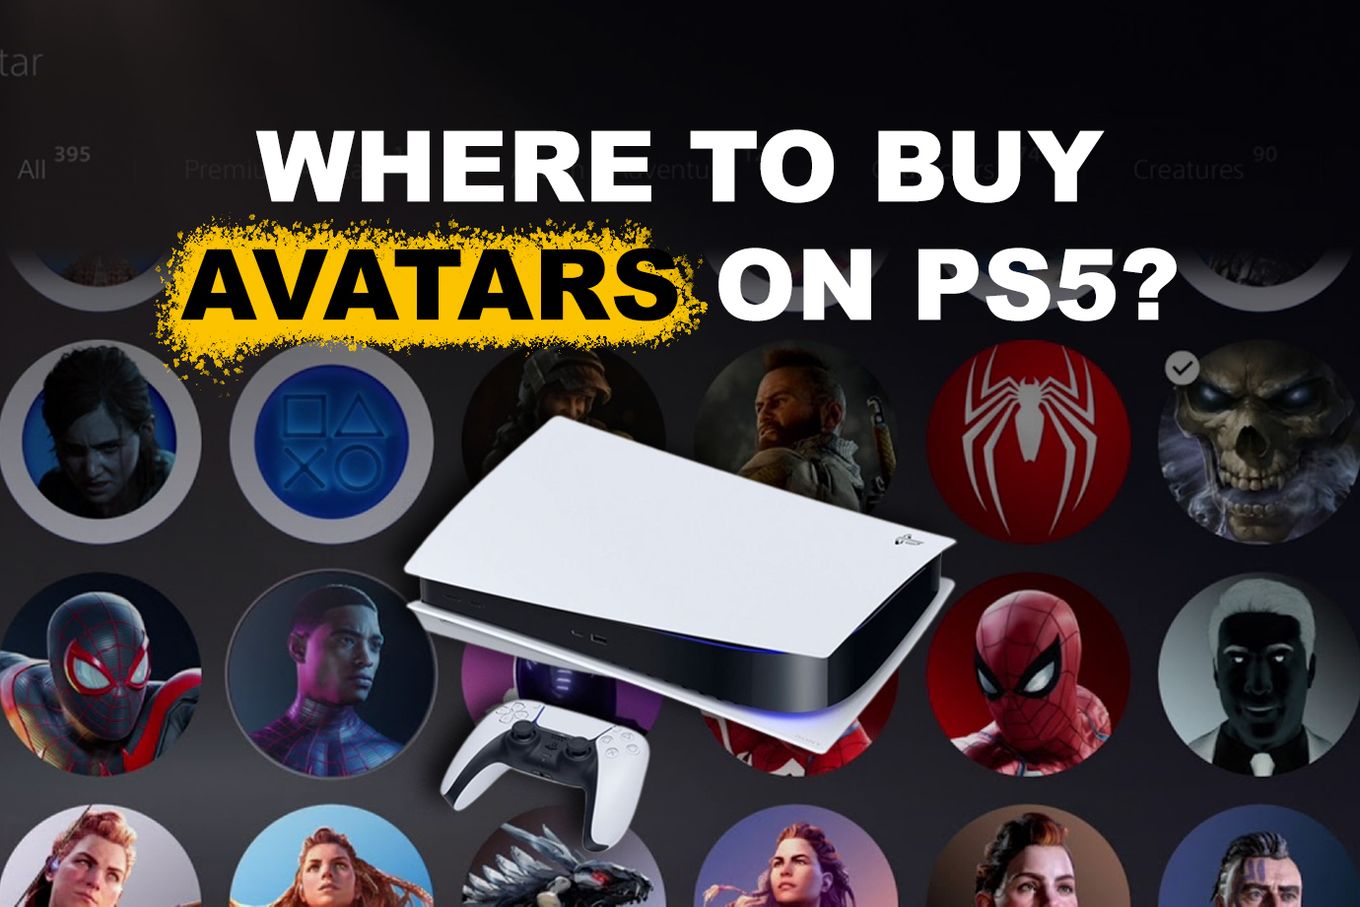 famélico becerro Llave How To Buy Avatars On PS5?